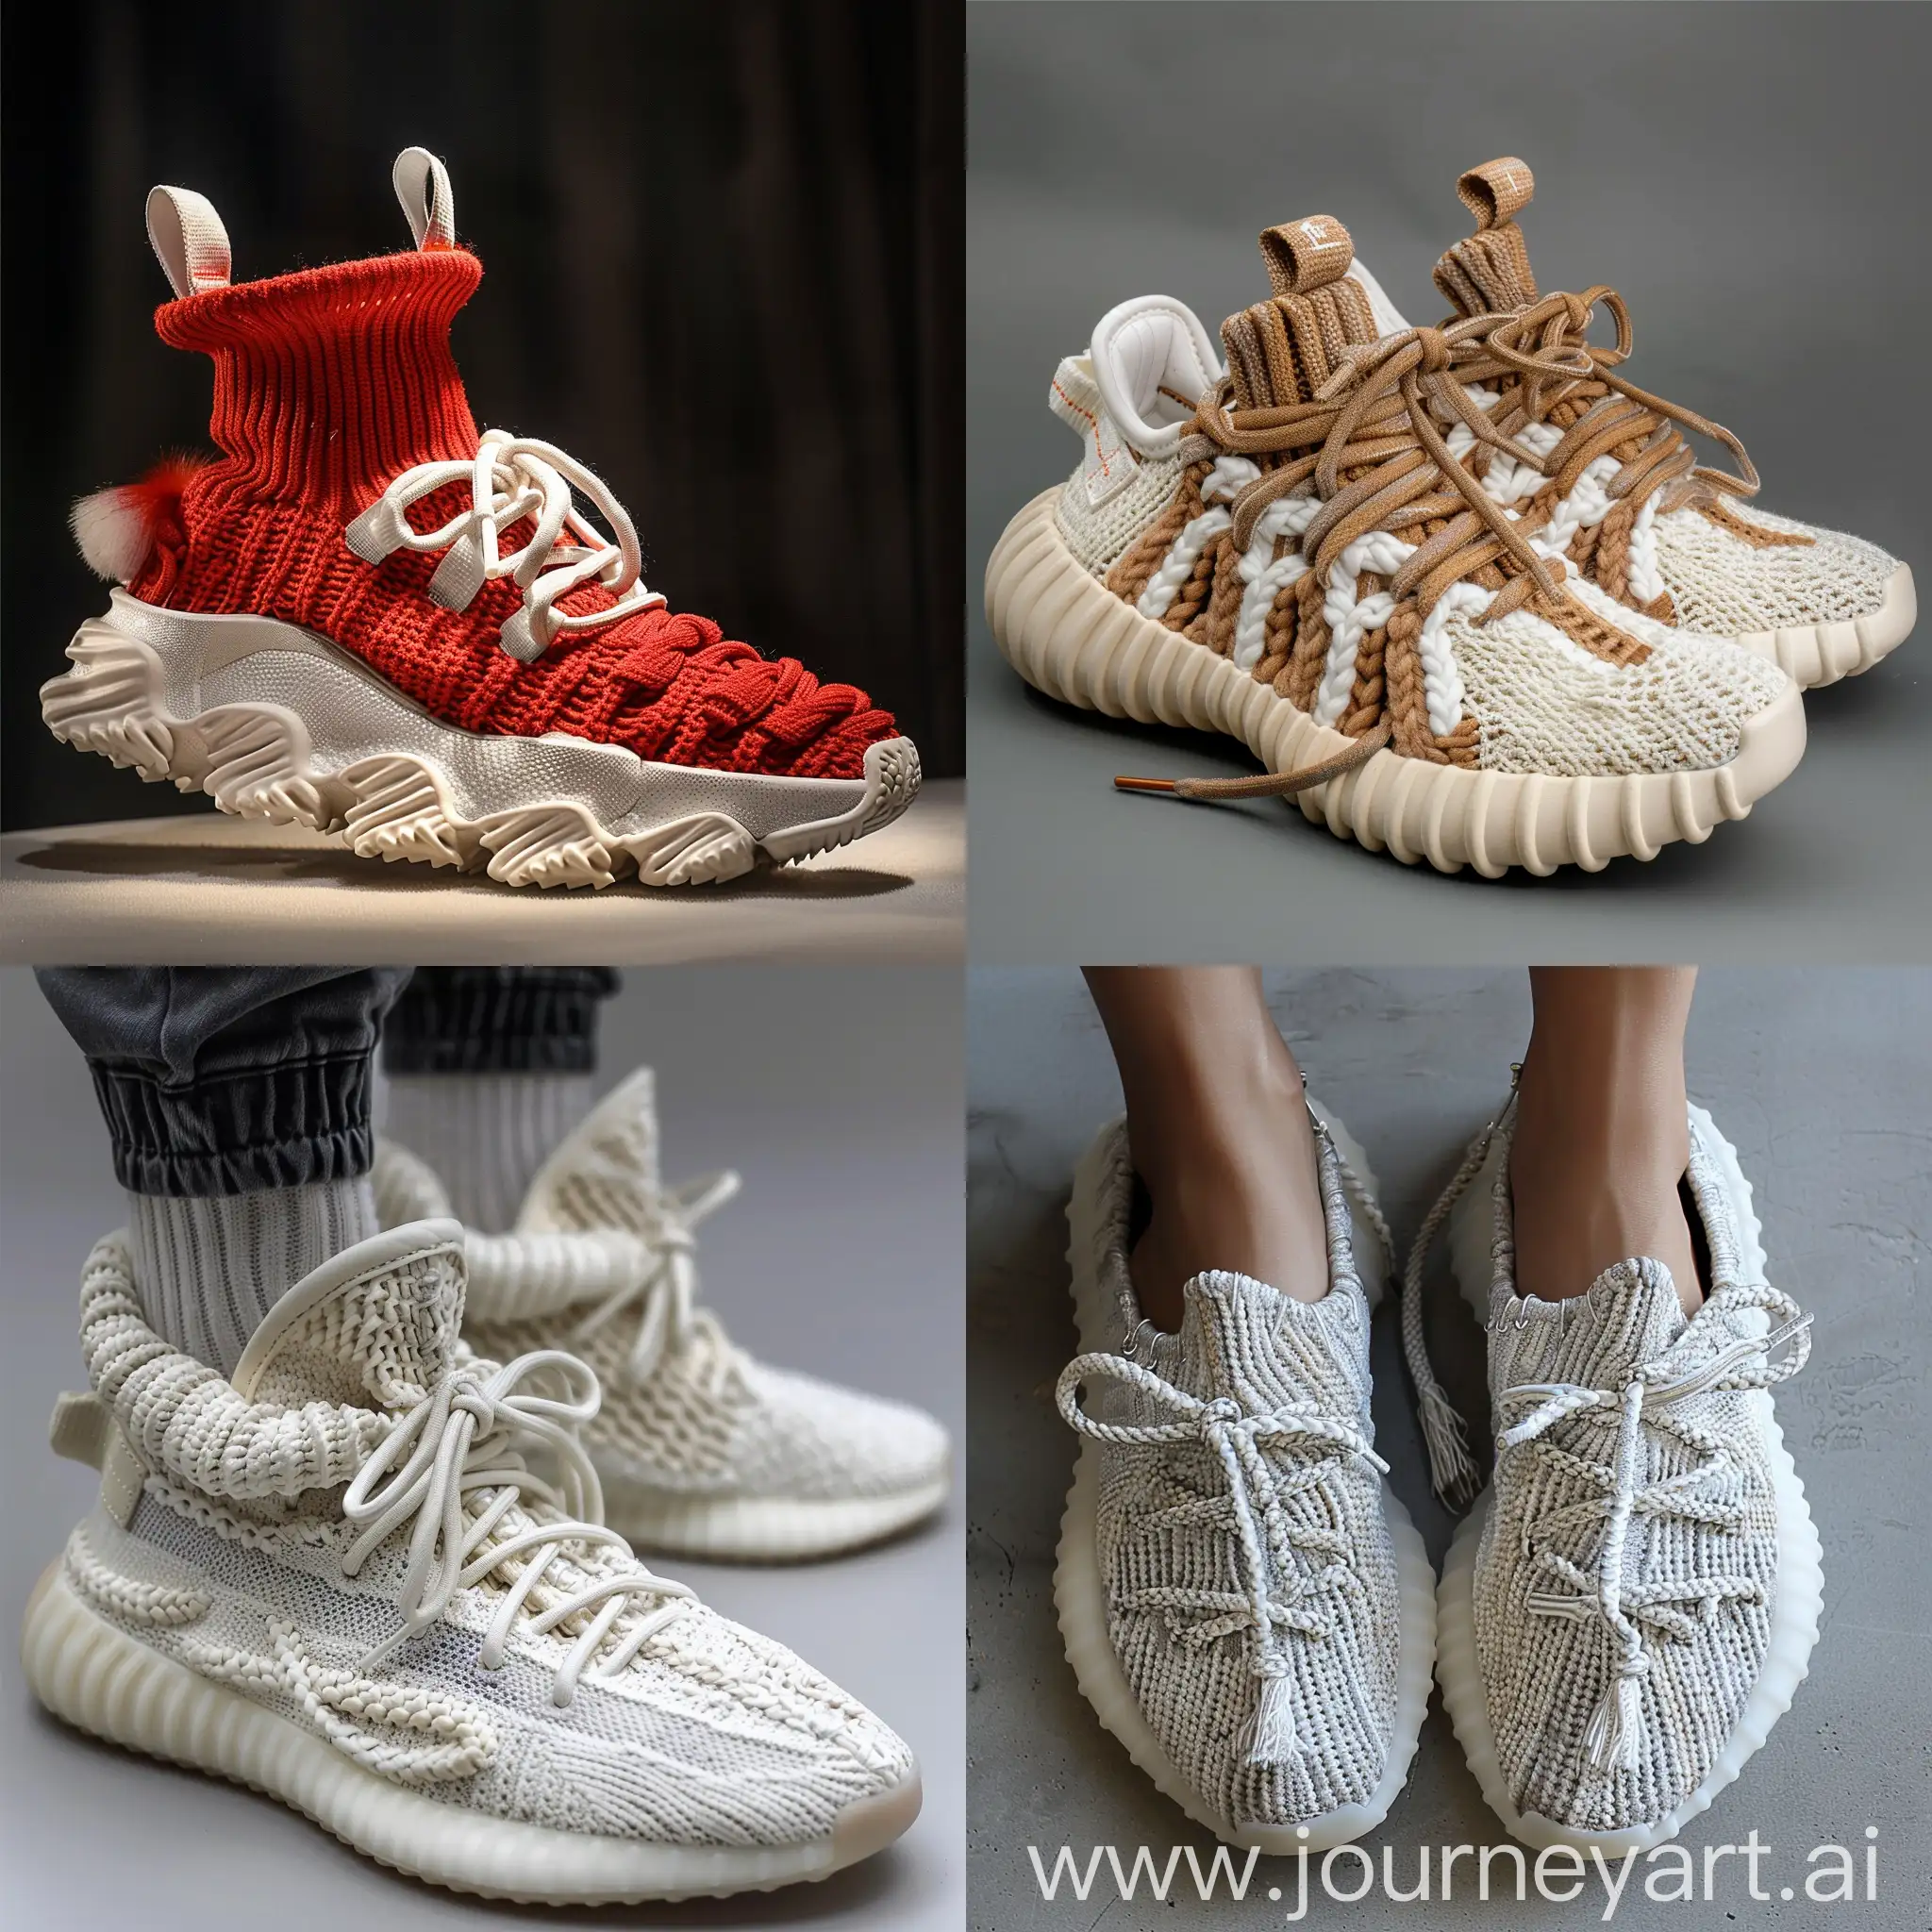 sneakers design inspiration by knitted fabric ,
Looks cool , chunky , catchy , trendy , knitted laces looks like travis scott hair , low neck